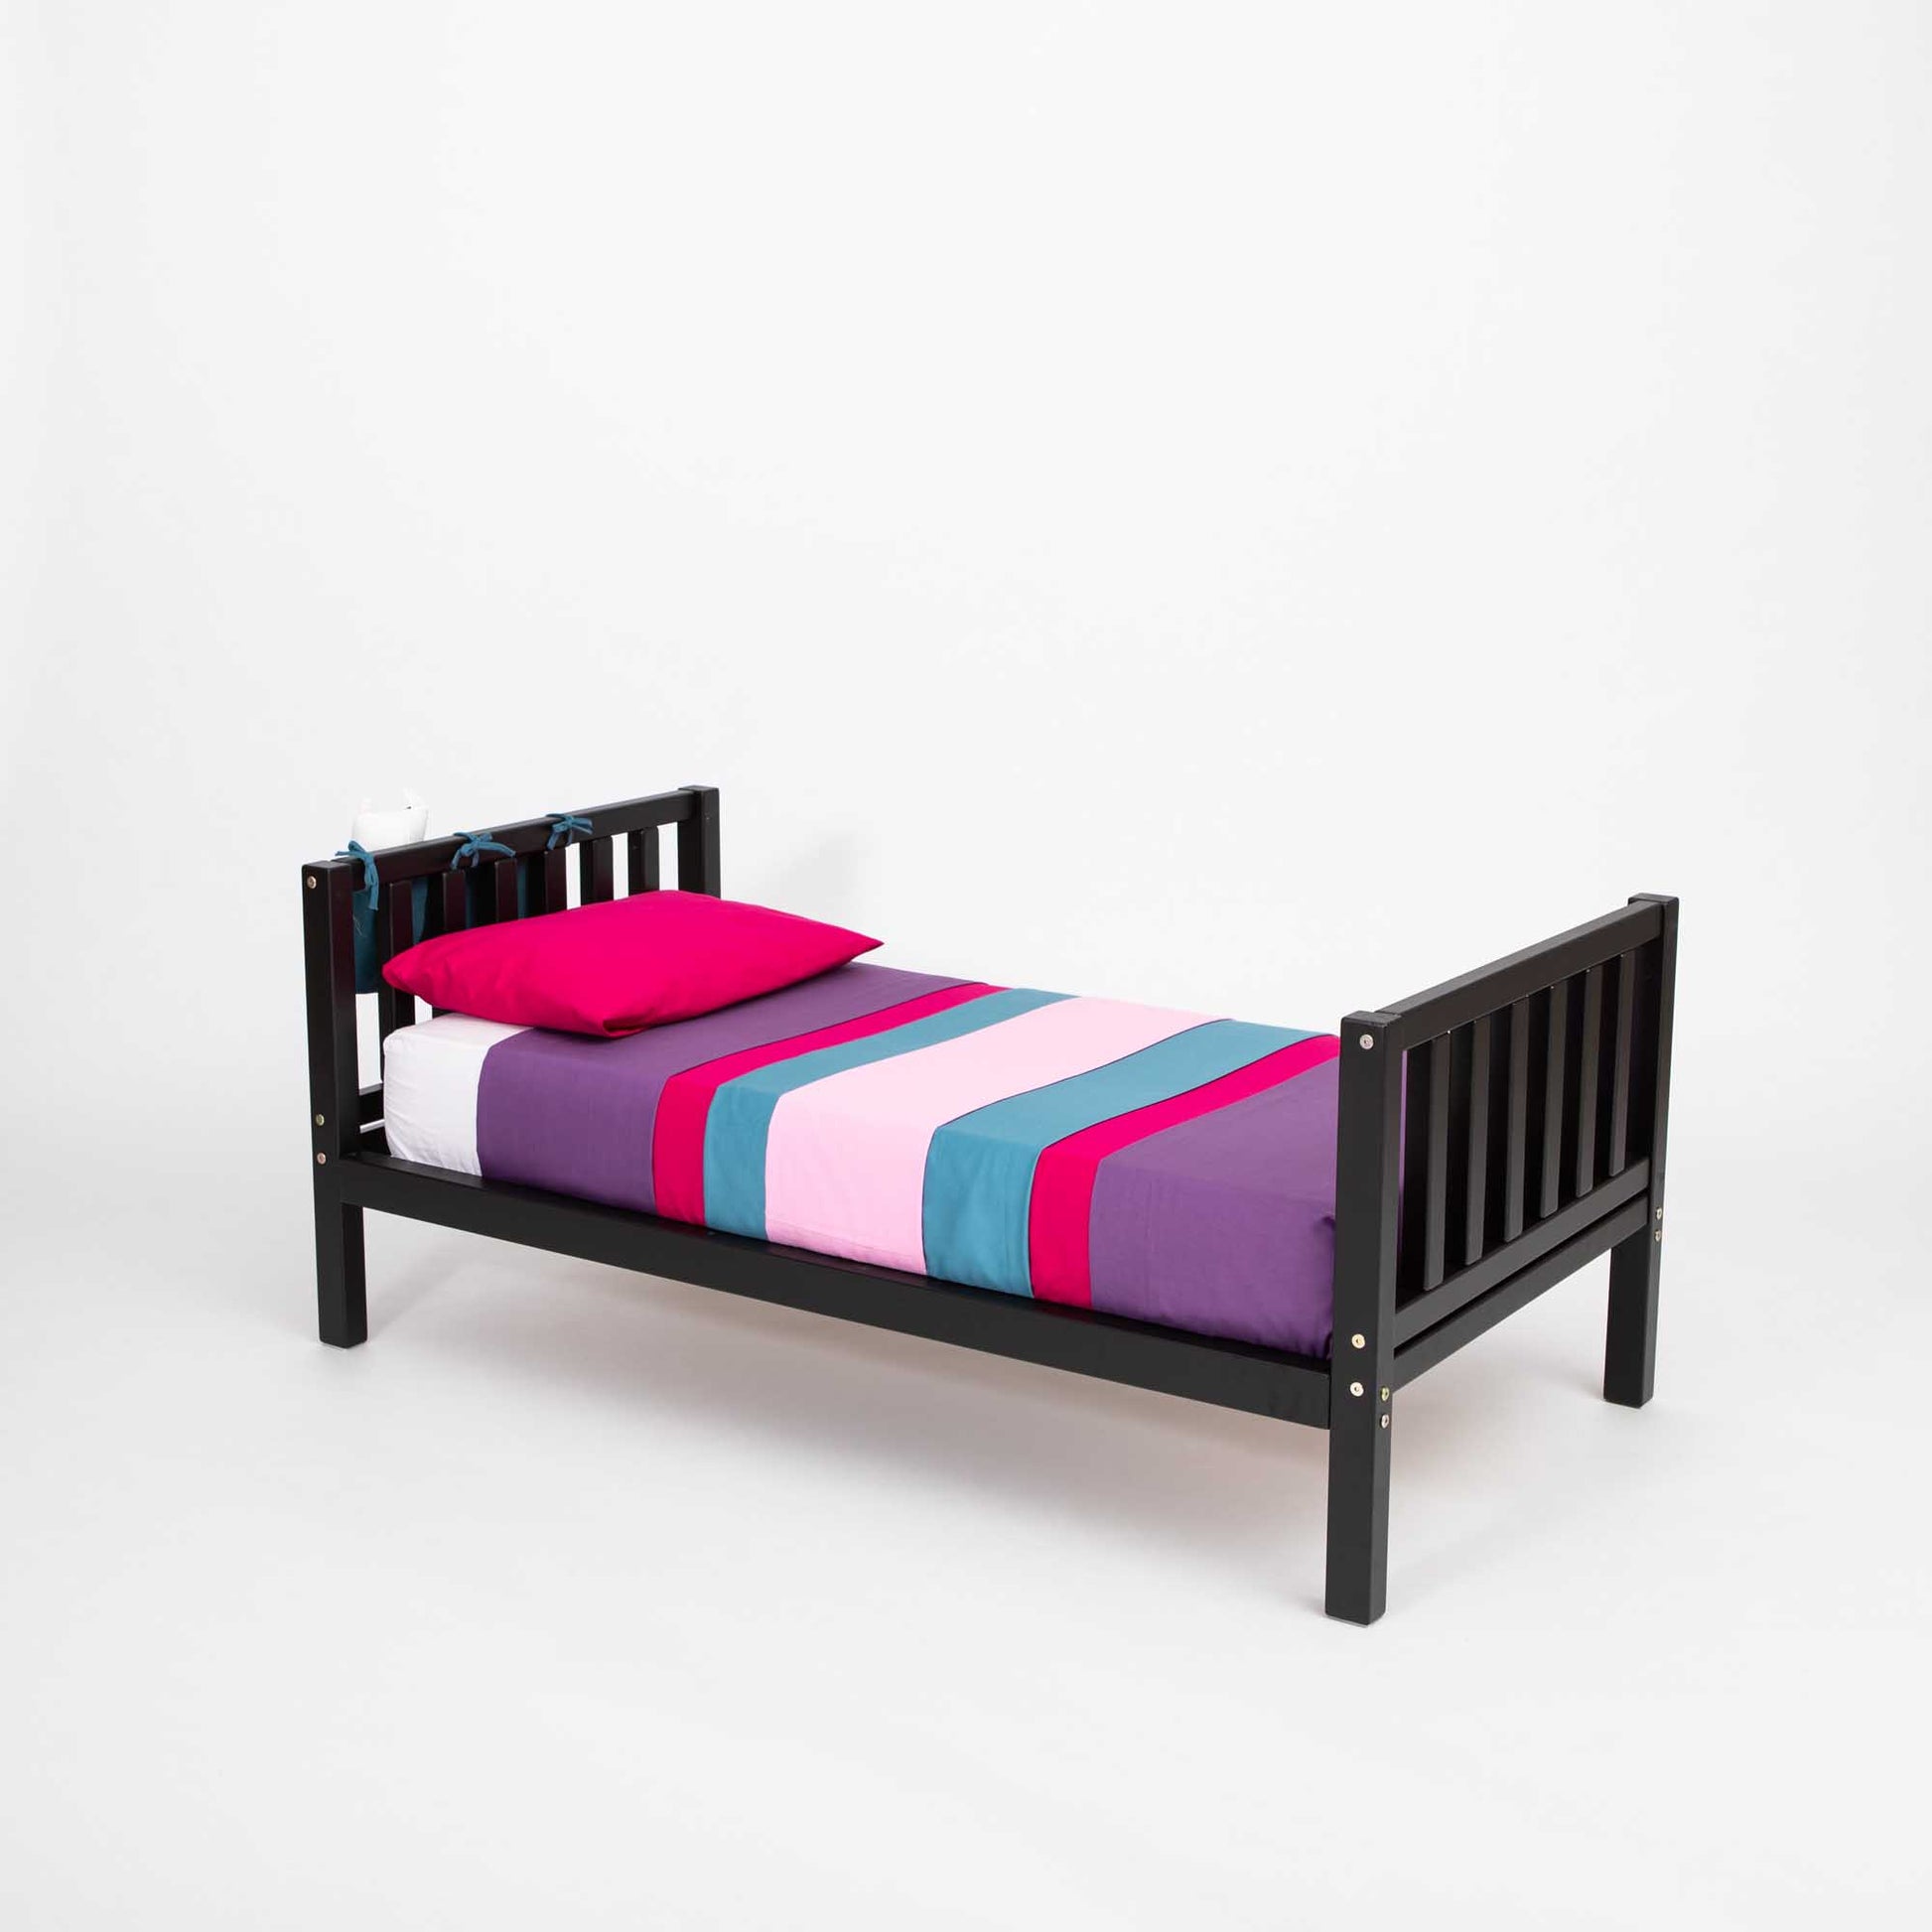 A 2-in-1 kid's bed on legs with a vertical rail headboard and footboard with a black frame and a pink and purple striped sheet.